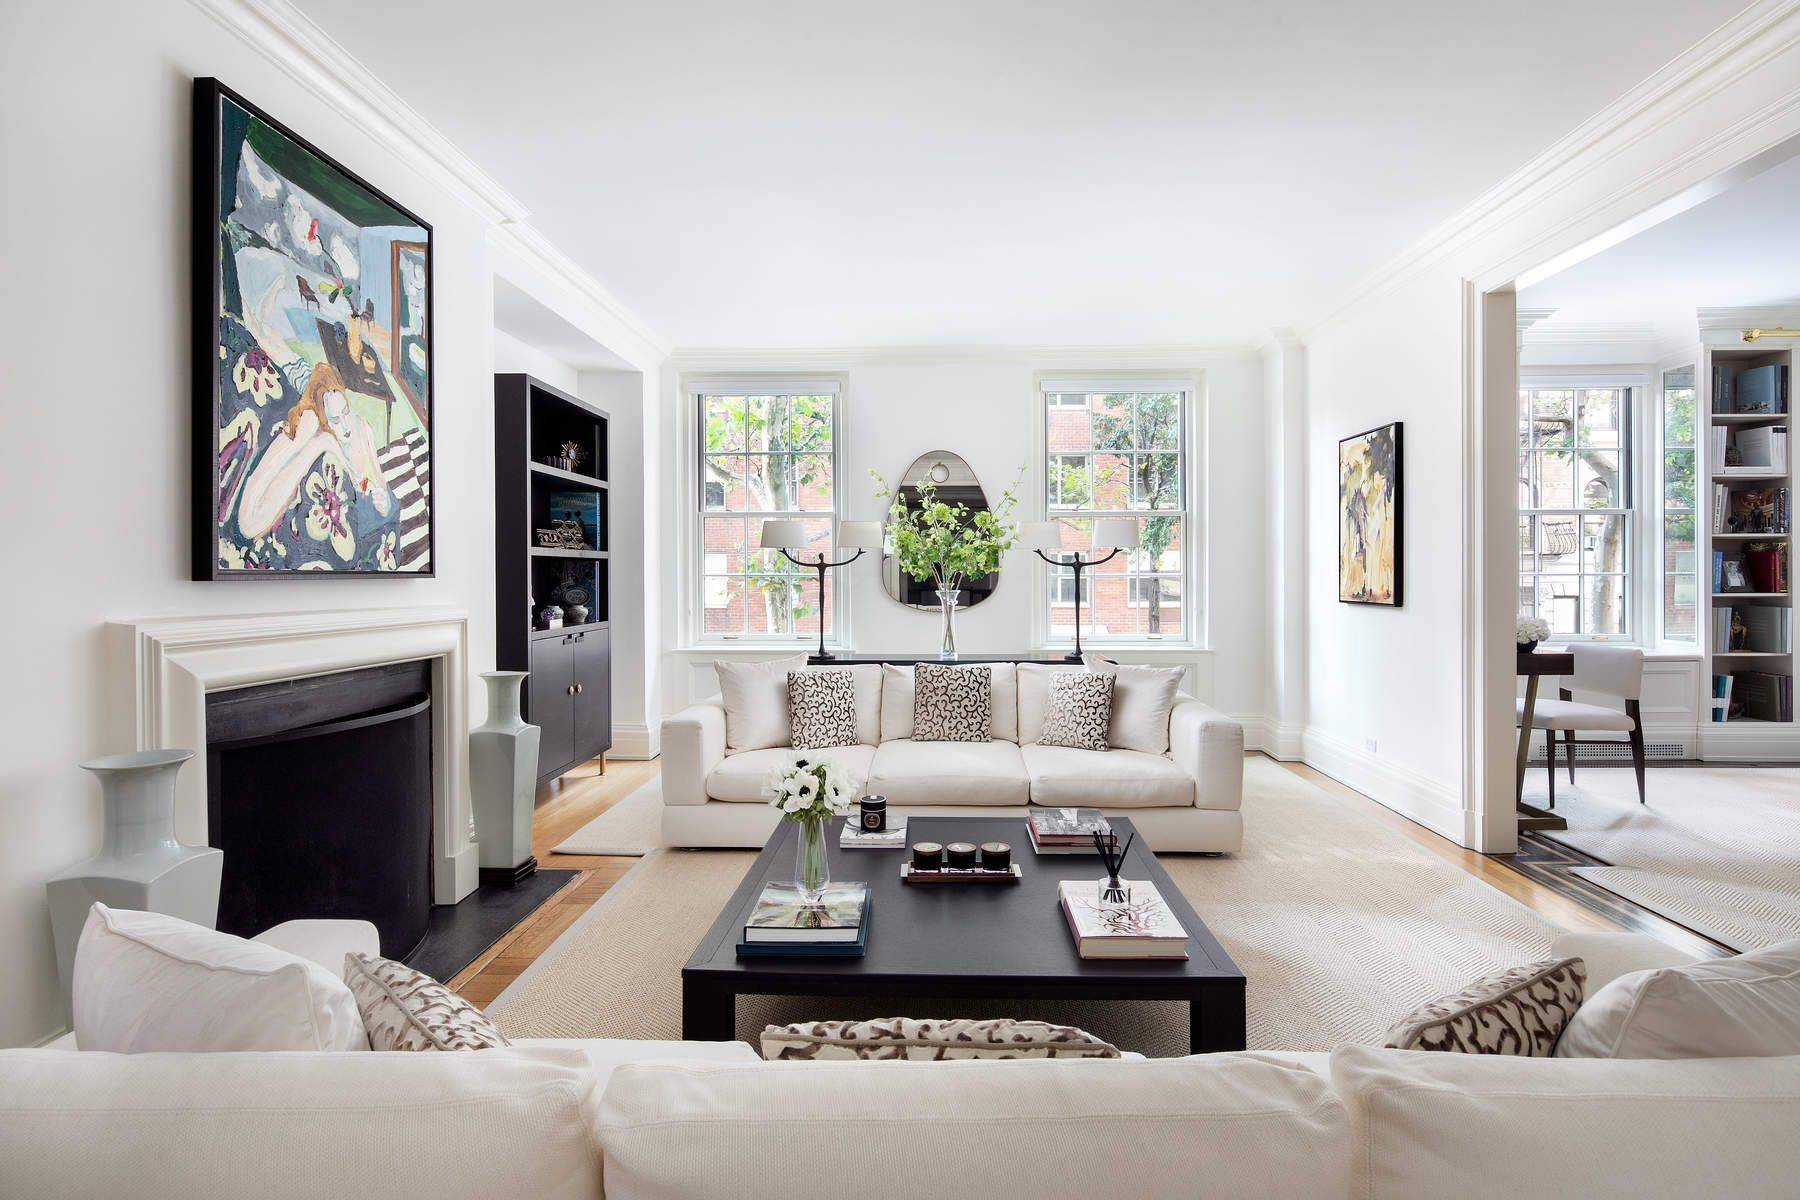 This expansive Classic Seven has beautifully scaled rooms and an extraordinary level of finish, with more than forty feet of southern light overlooking the treetops of charming Sutton Place below.